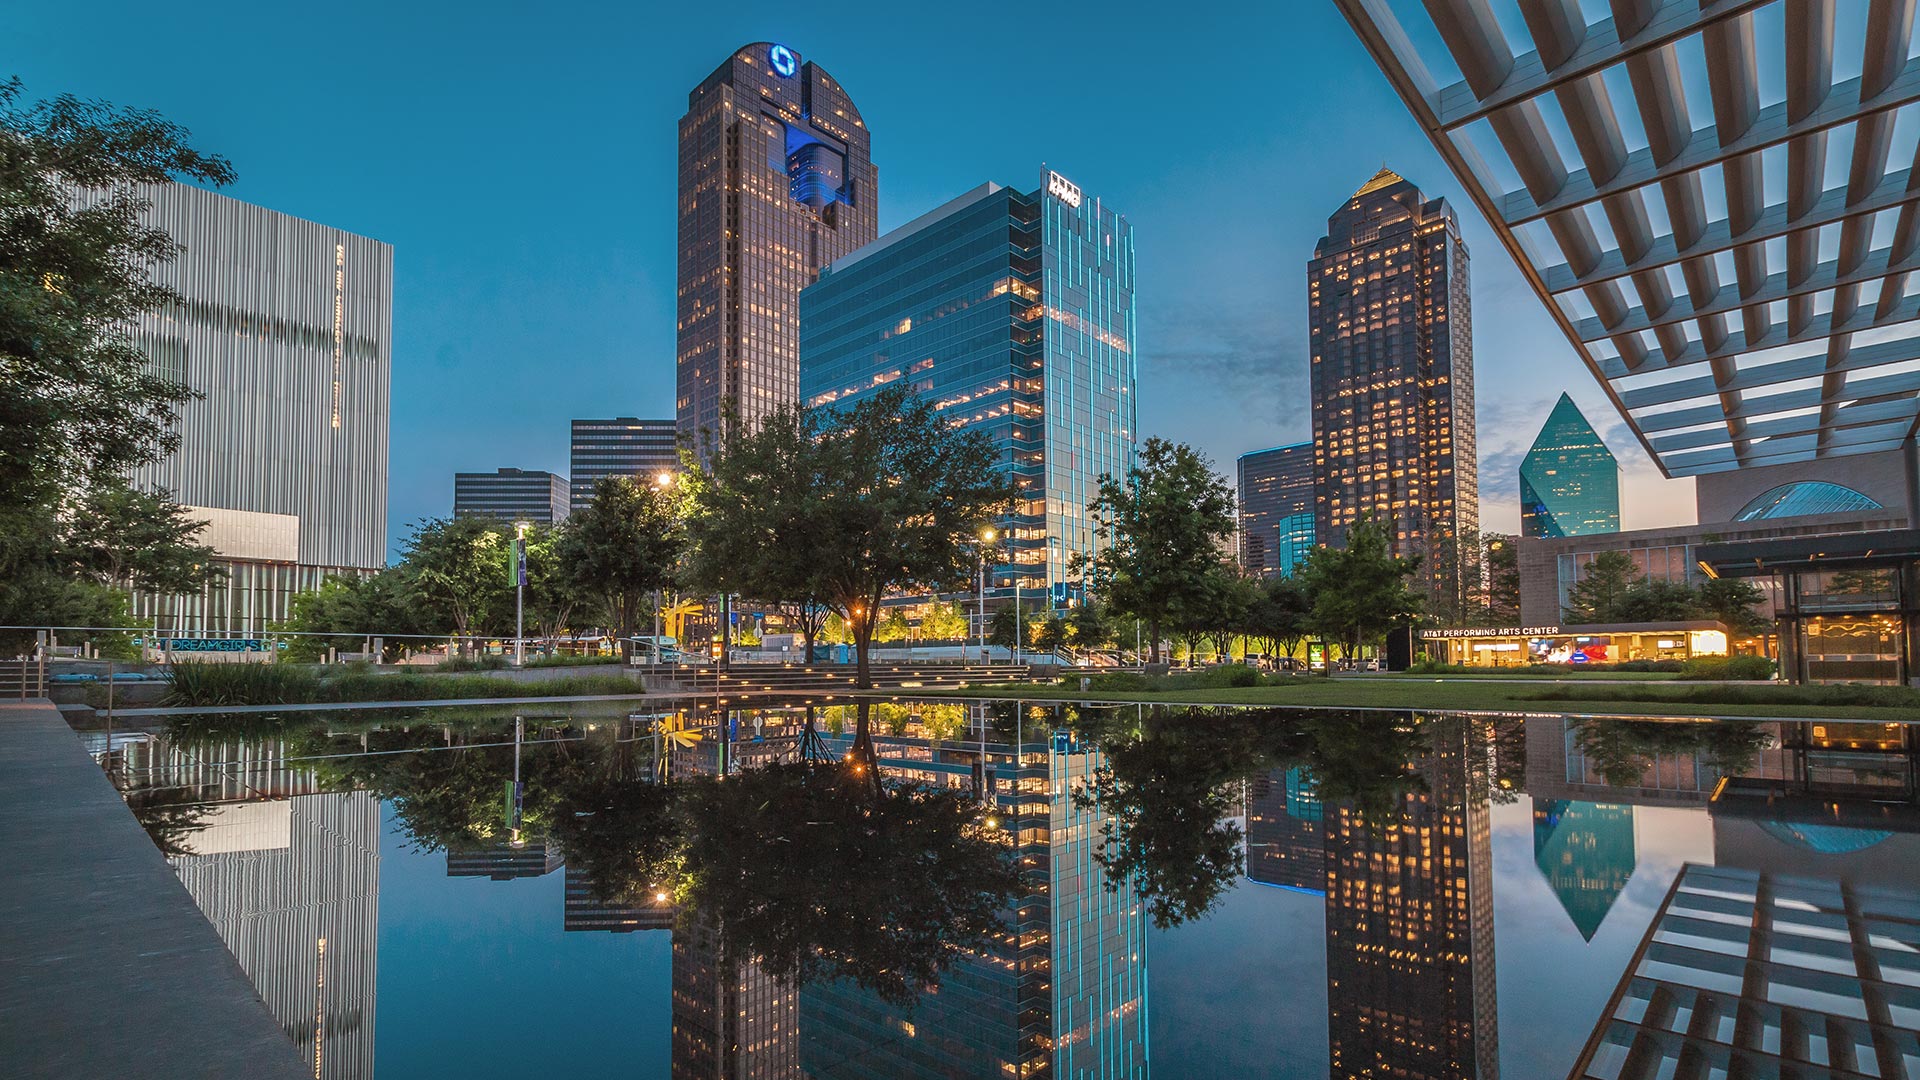 Plan a Dallas, Texas Weekend Getaway, to Find Art, Culture and Excellent Food (Dallas)